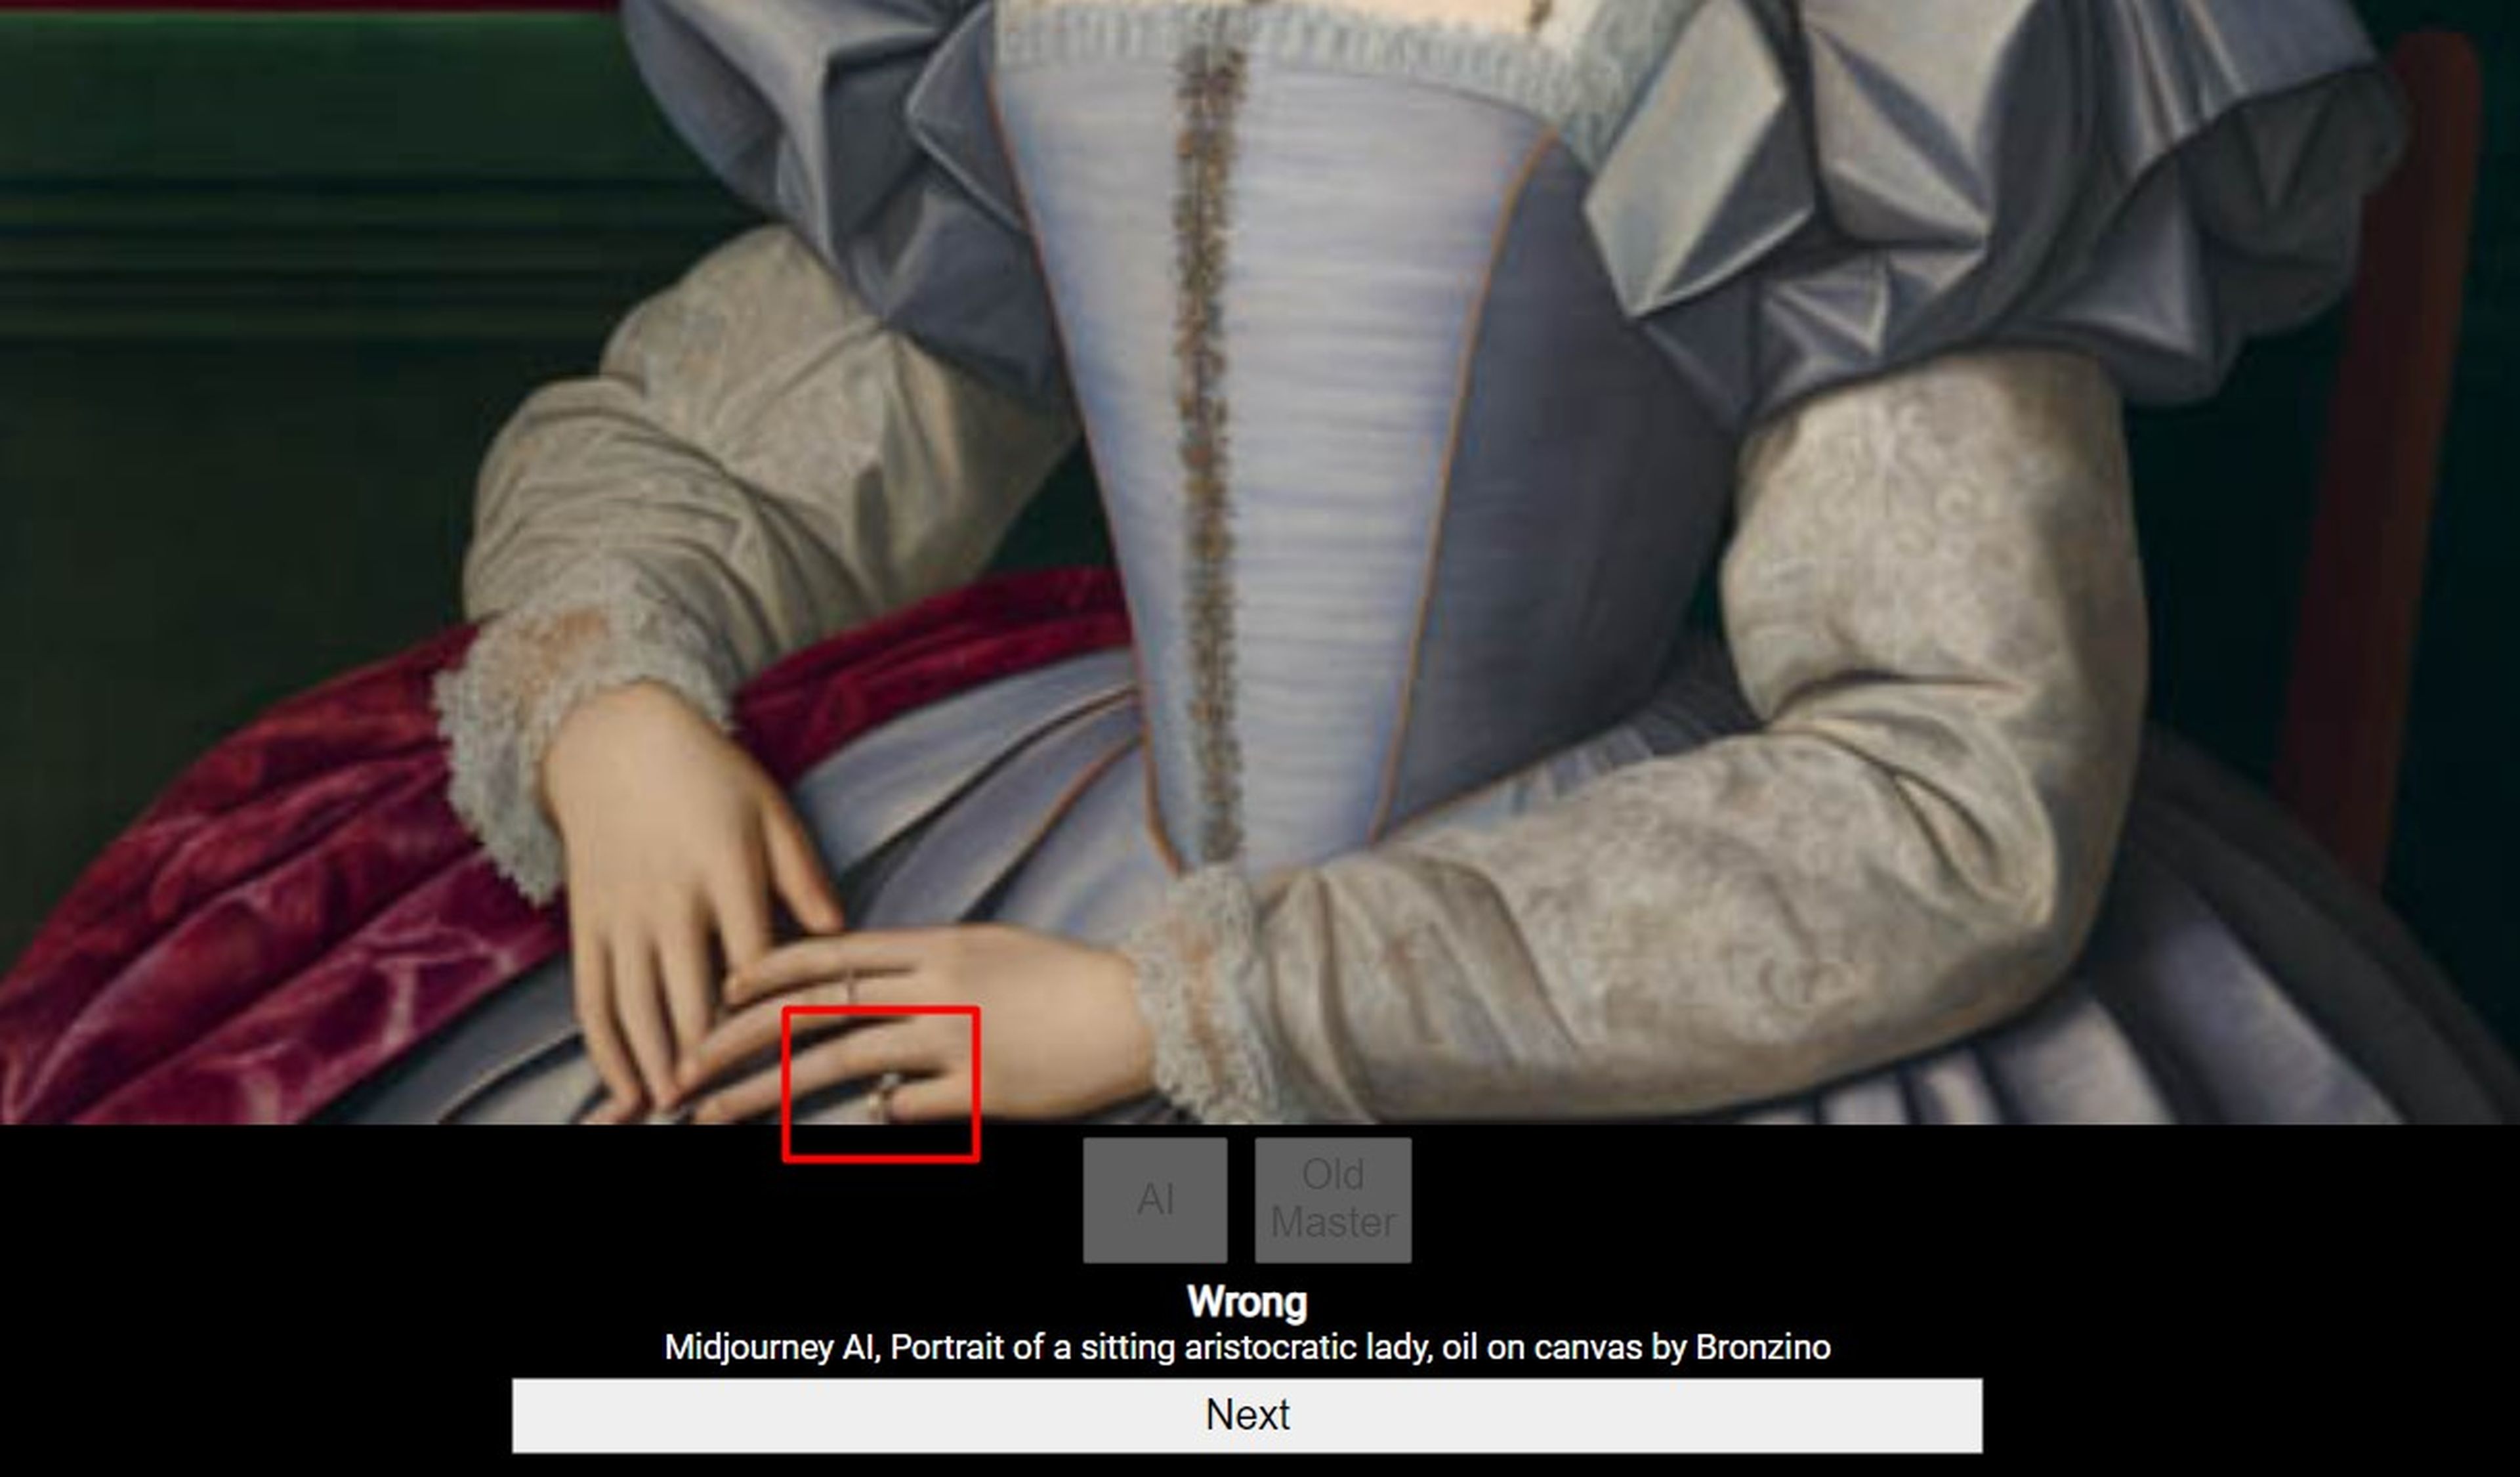 {"draftBlockCopy":({"blockType":"header-two","blockKey":"do2p7","entities":(),"text":"Can you always tell AI art from real old master paintings?","styles":()})}